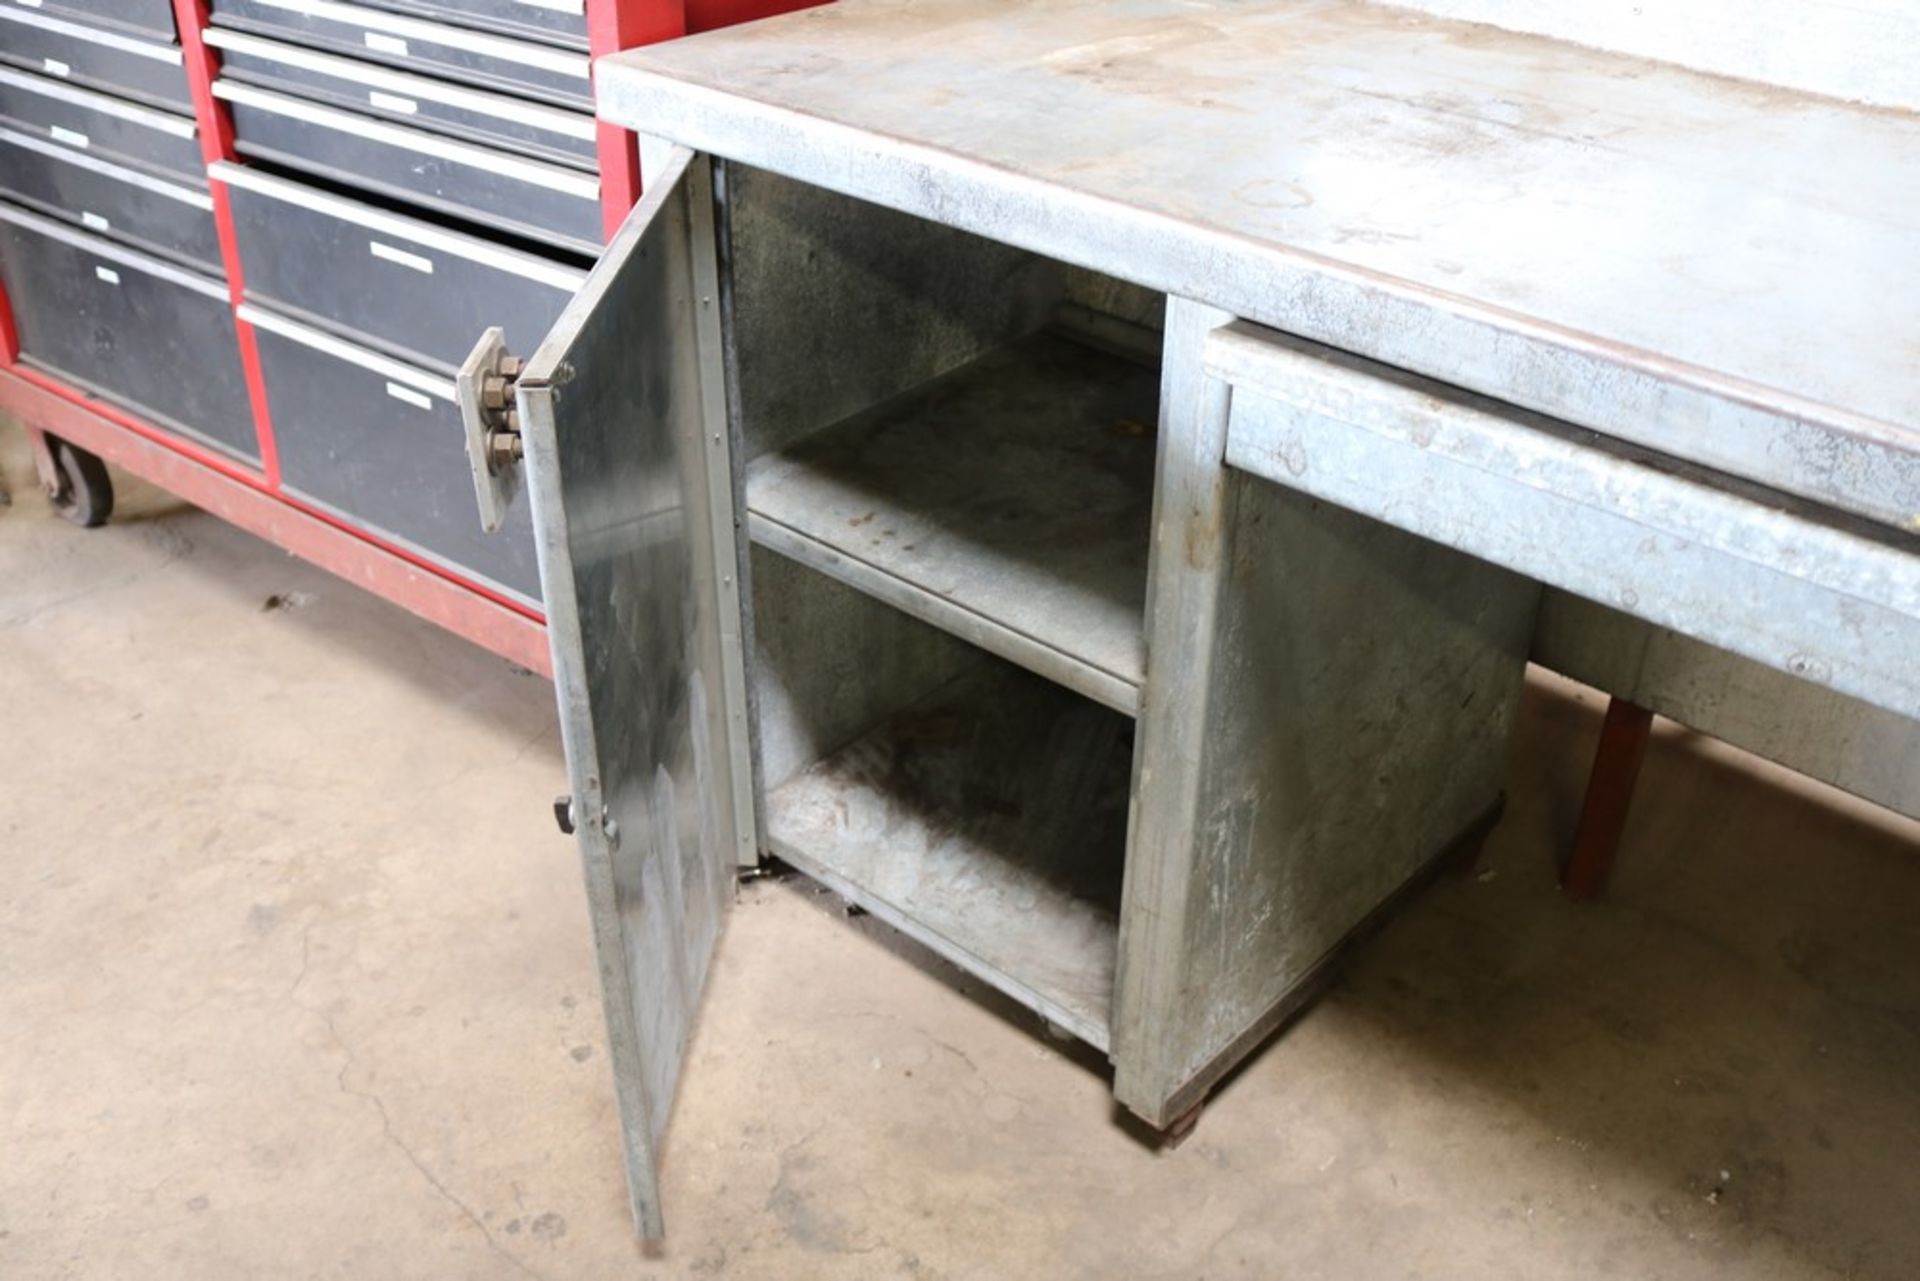 Heavy Duty Metal Work Table, (2) Cabinets 7' x 25'' x 25'', (1) Drawer, Backsplash not included - Image 2 of 4